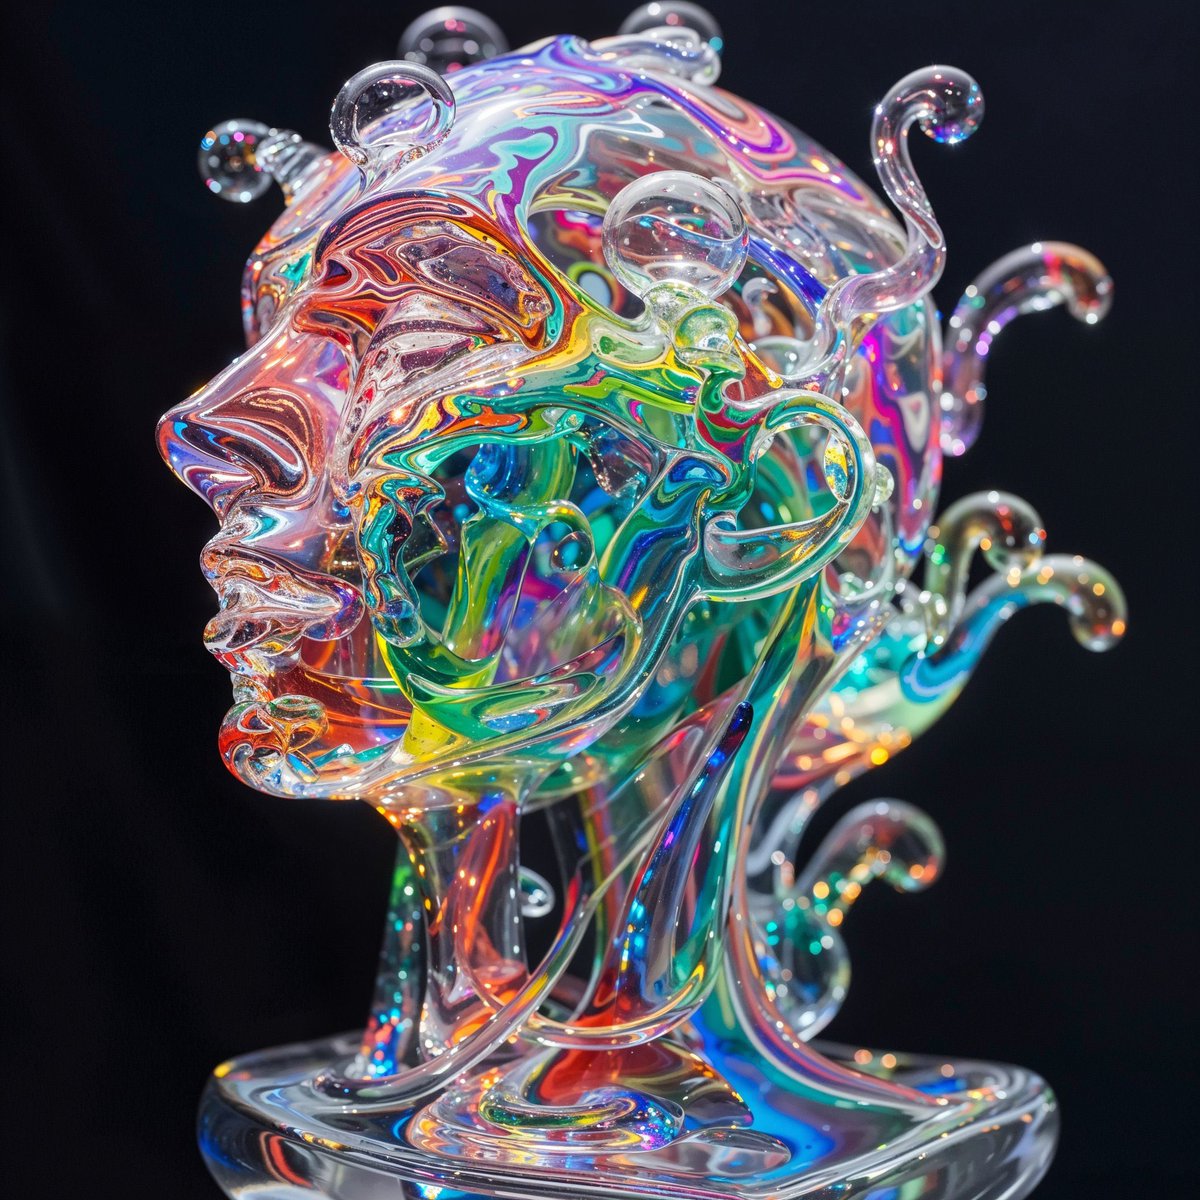 I used Midjourney v6 to create glass sculptures inspired by the effects of various substances. The results are extraordinary.

1. LSD